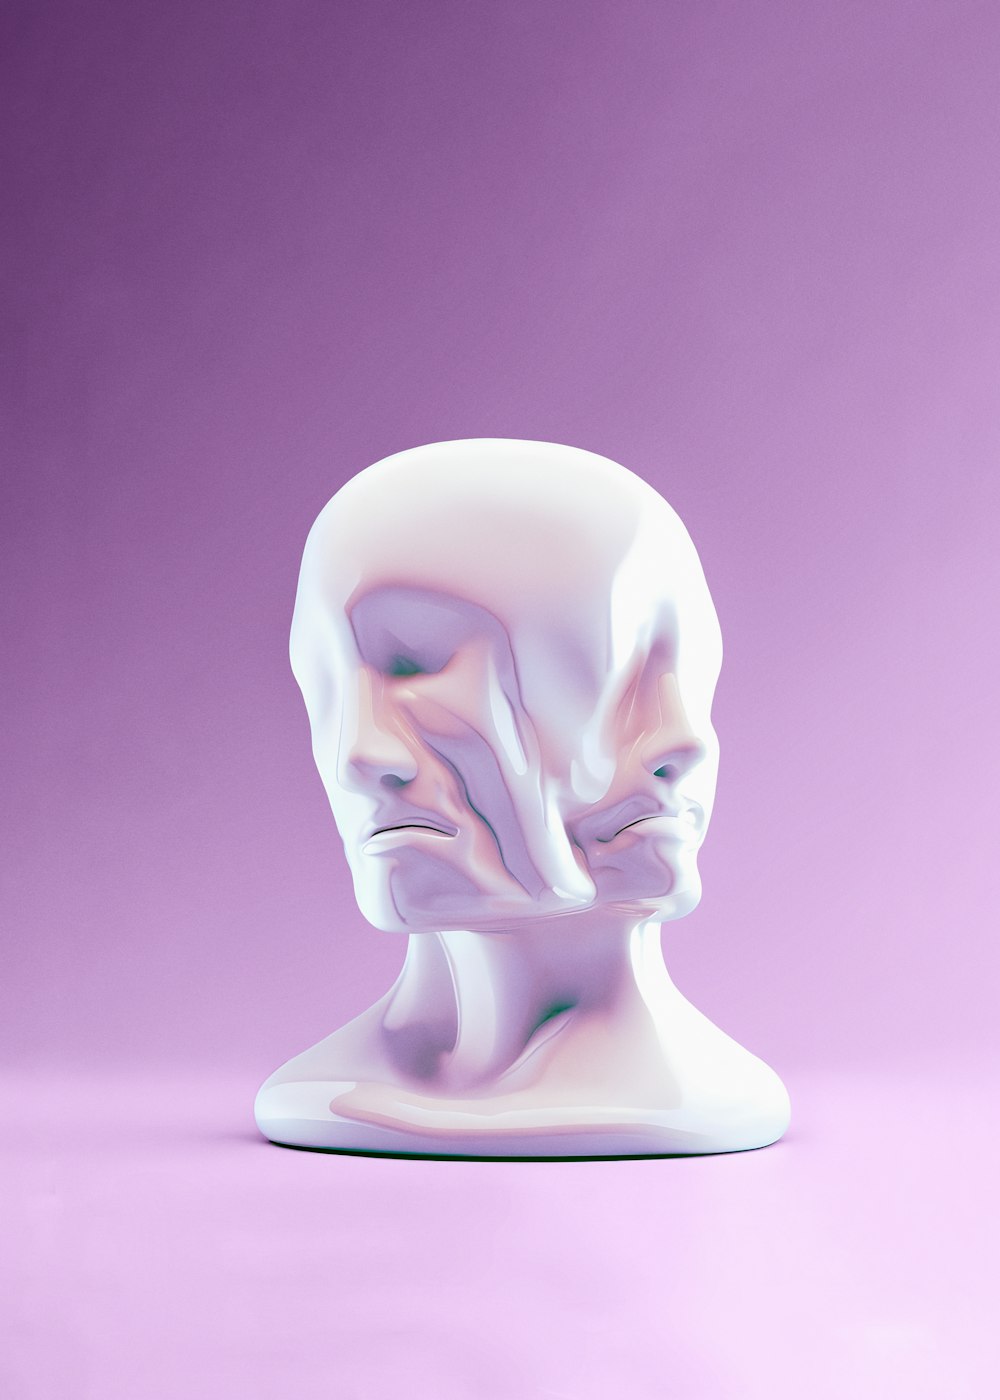 a white sculpture of a human head on a purple background